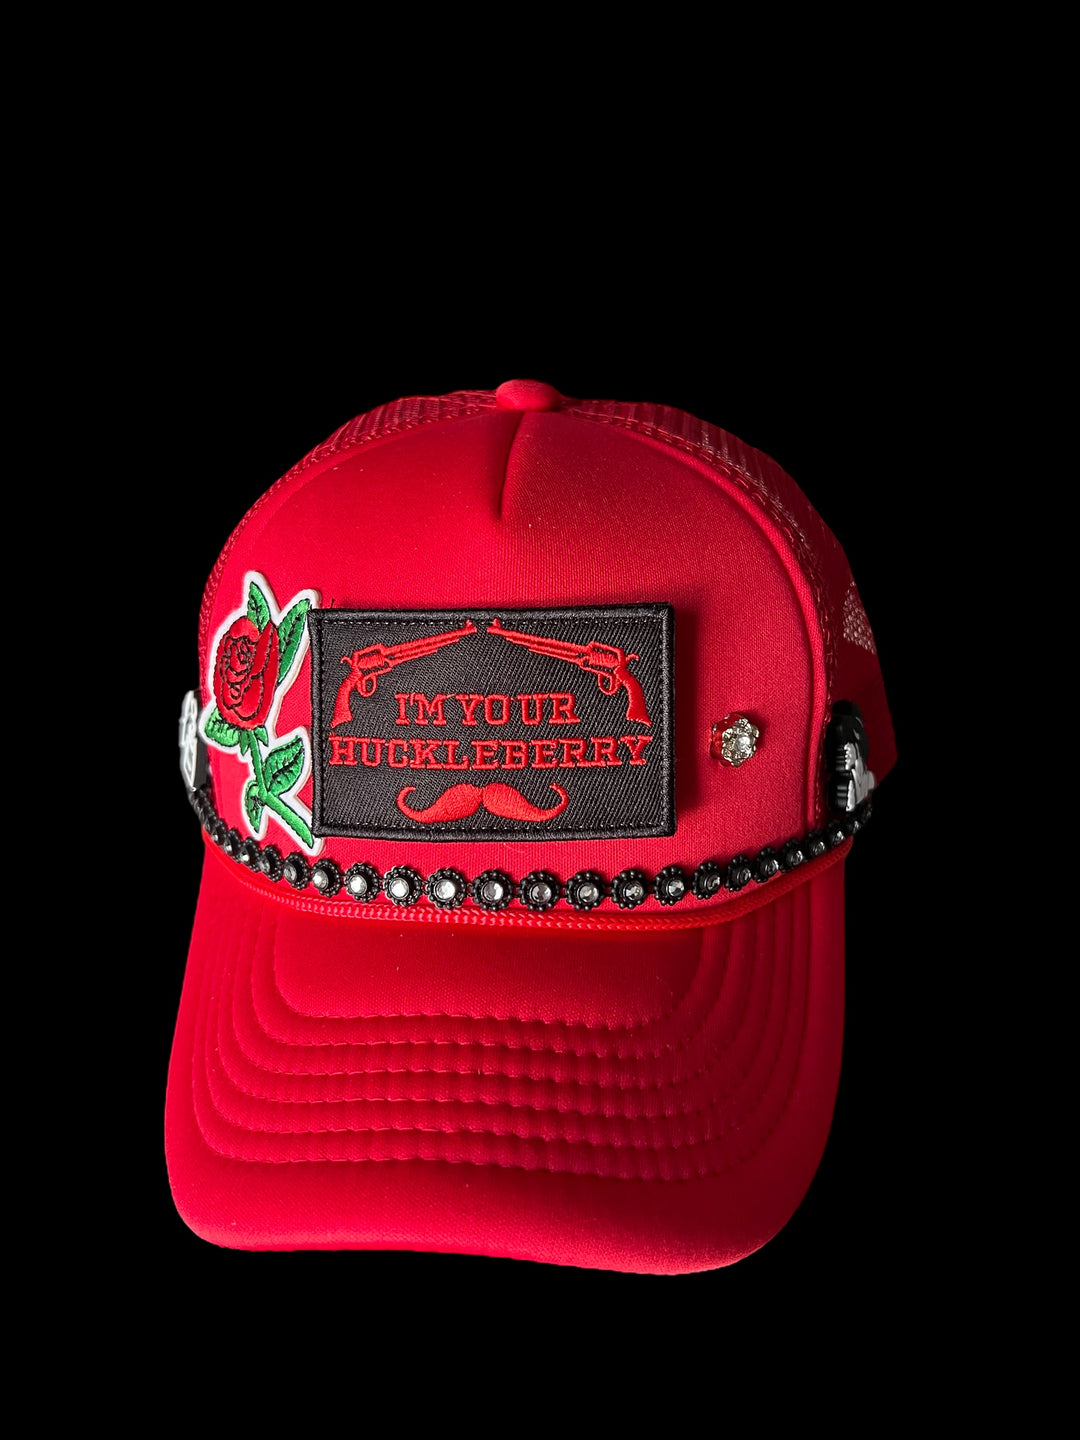 Trucker Hat for Men & Women Red Lace Heart Quilt Embroidery Cotton